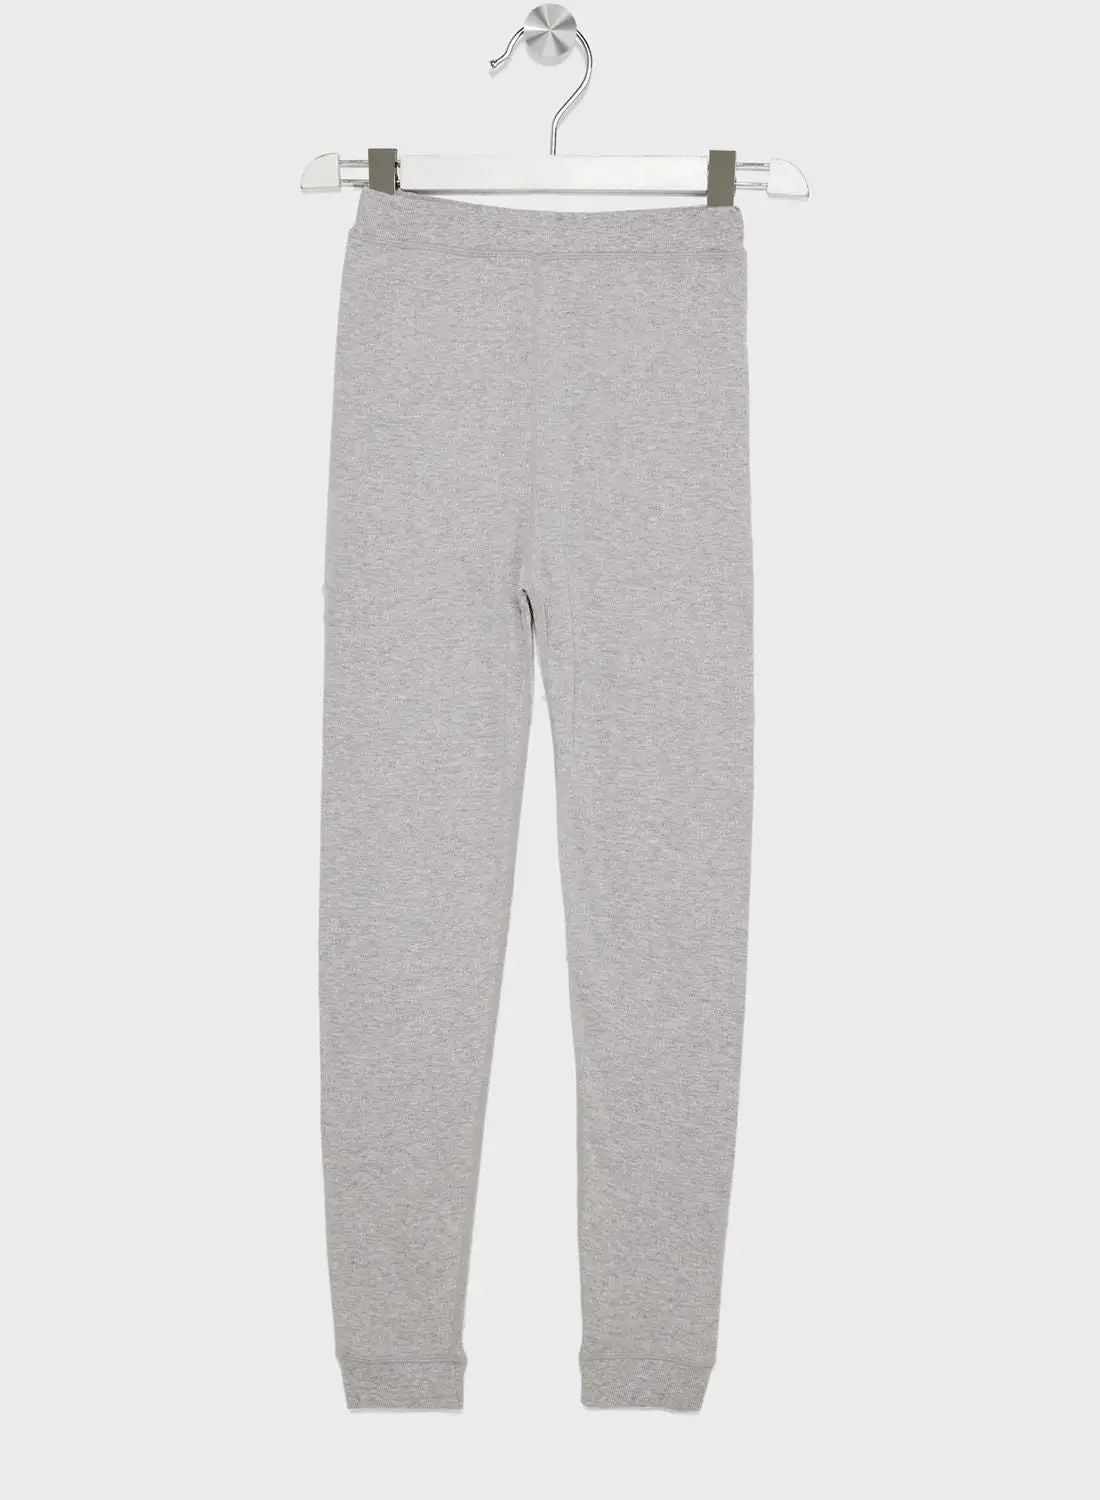 Marks & Spencer Youth Essential Sweatpants